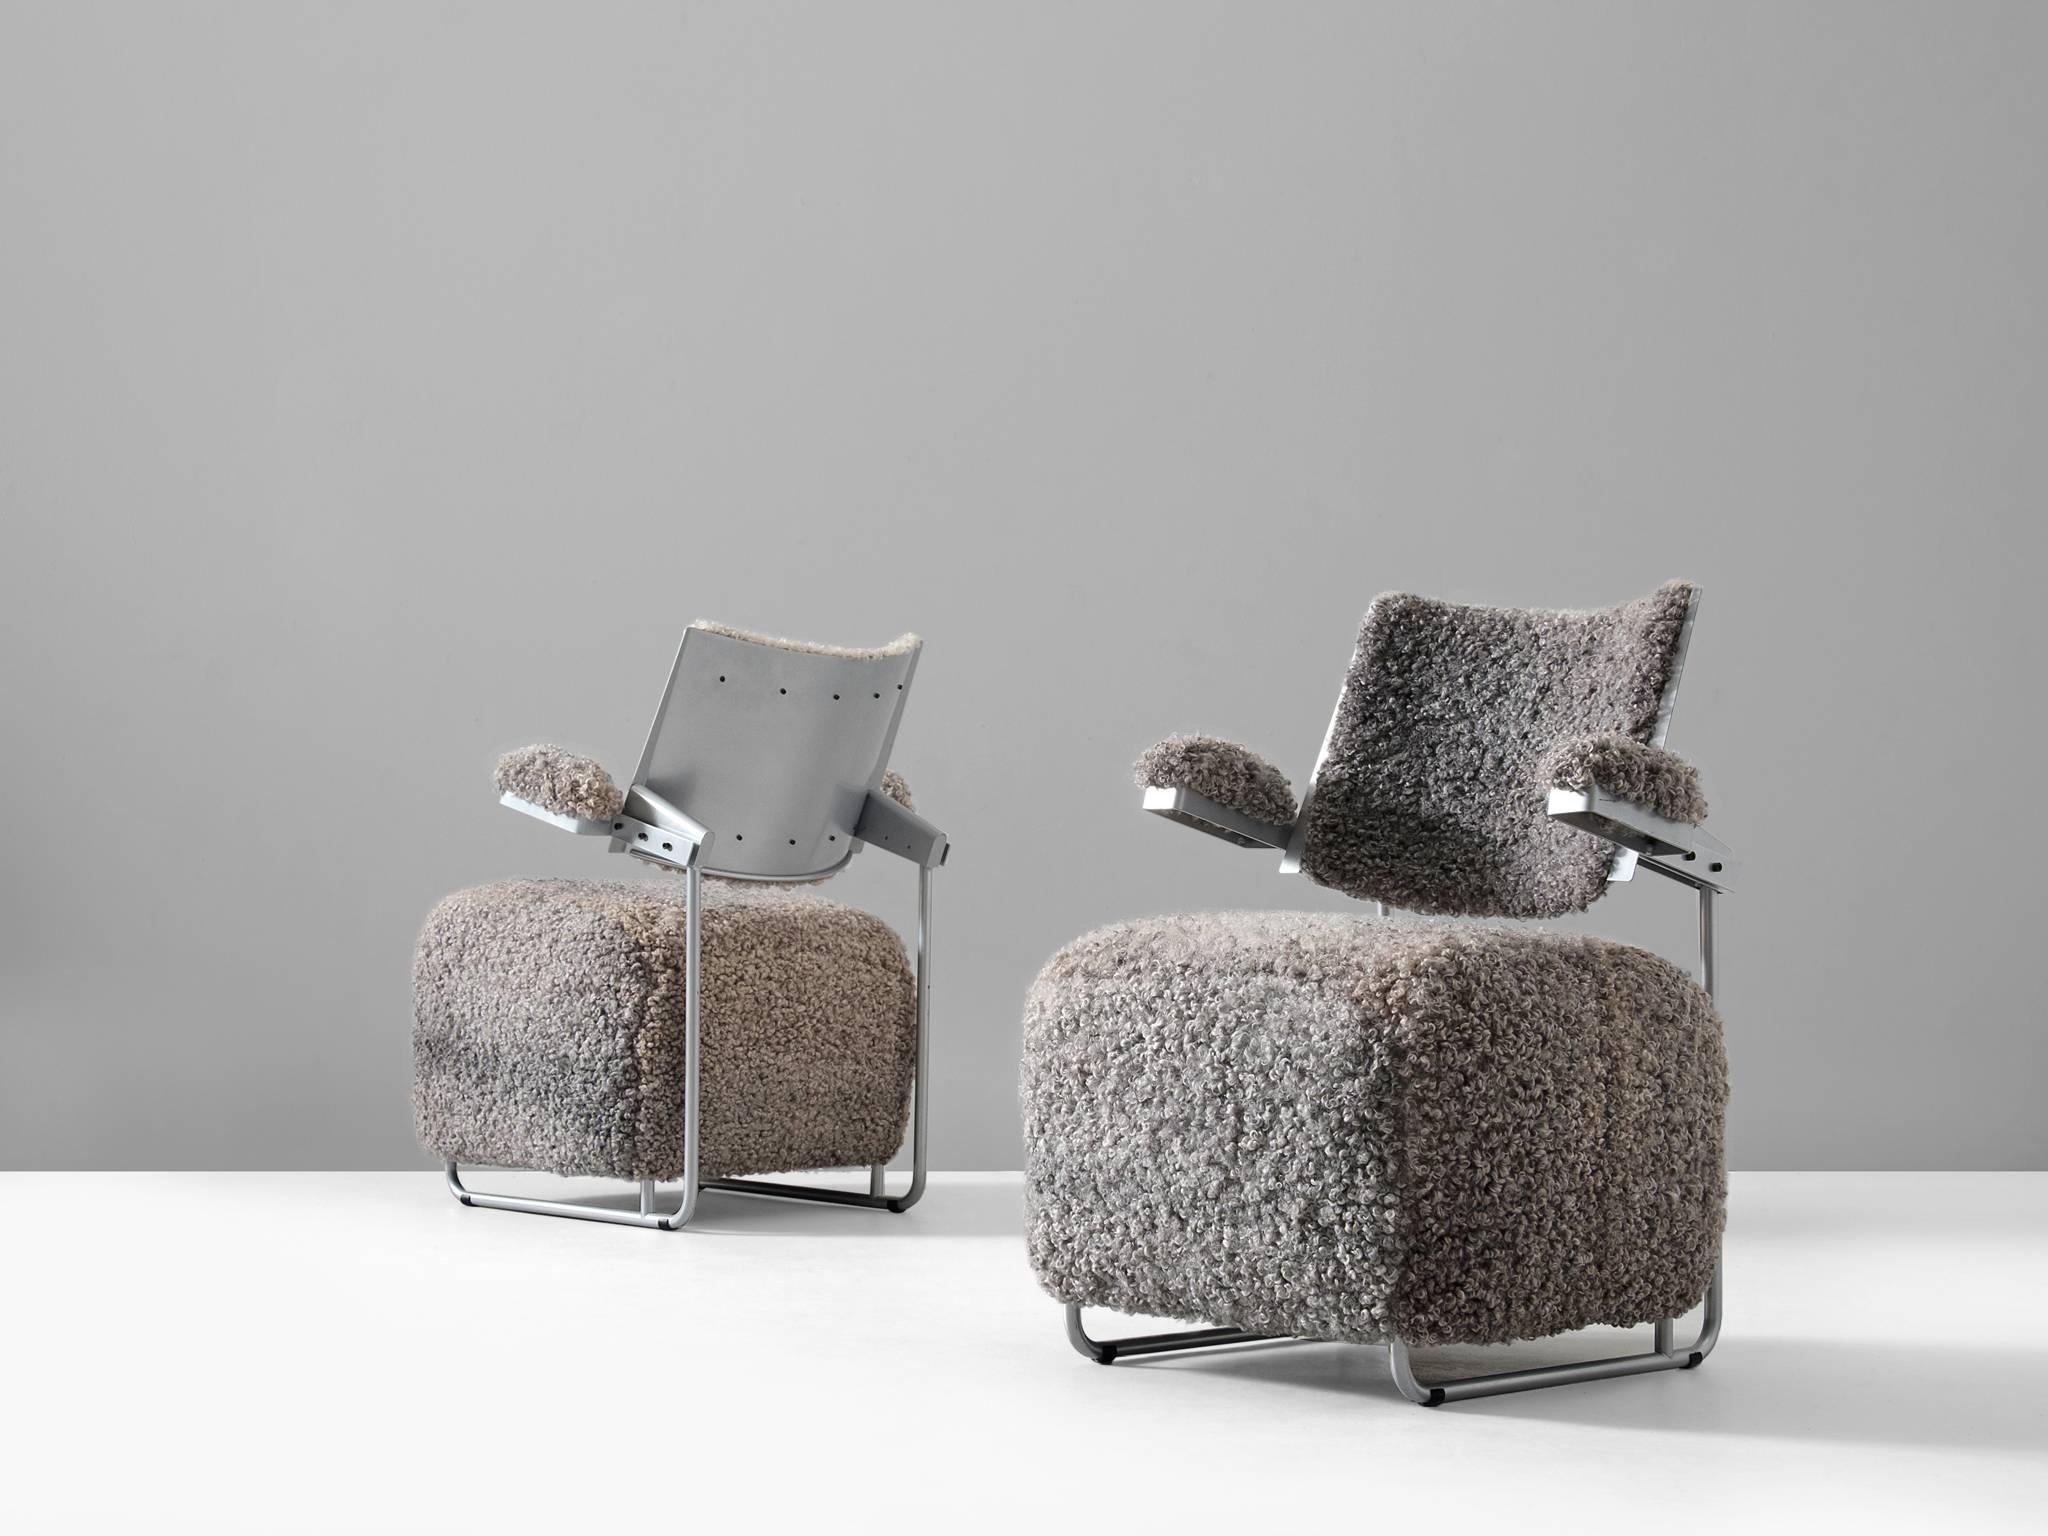 Pair of lounge chairs model 'Oscar, in metal and fabric, by Harri Kohonen for Inno, Finland, 1990s.

Set of two free-form easy chairs in grey fuzzy upholstery. The chair consist of a tabouret seating with armrests and curved back. The metal